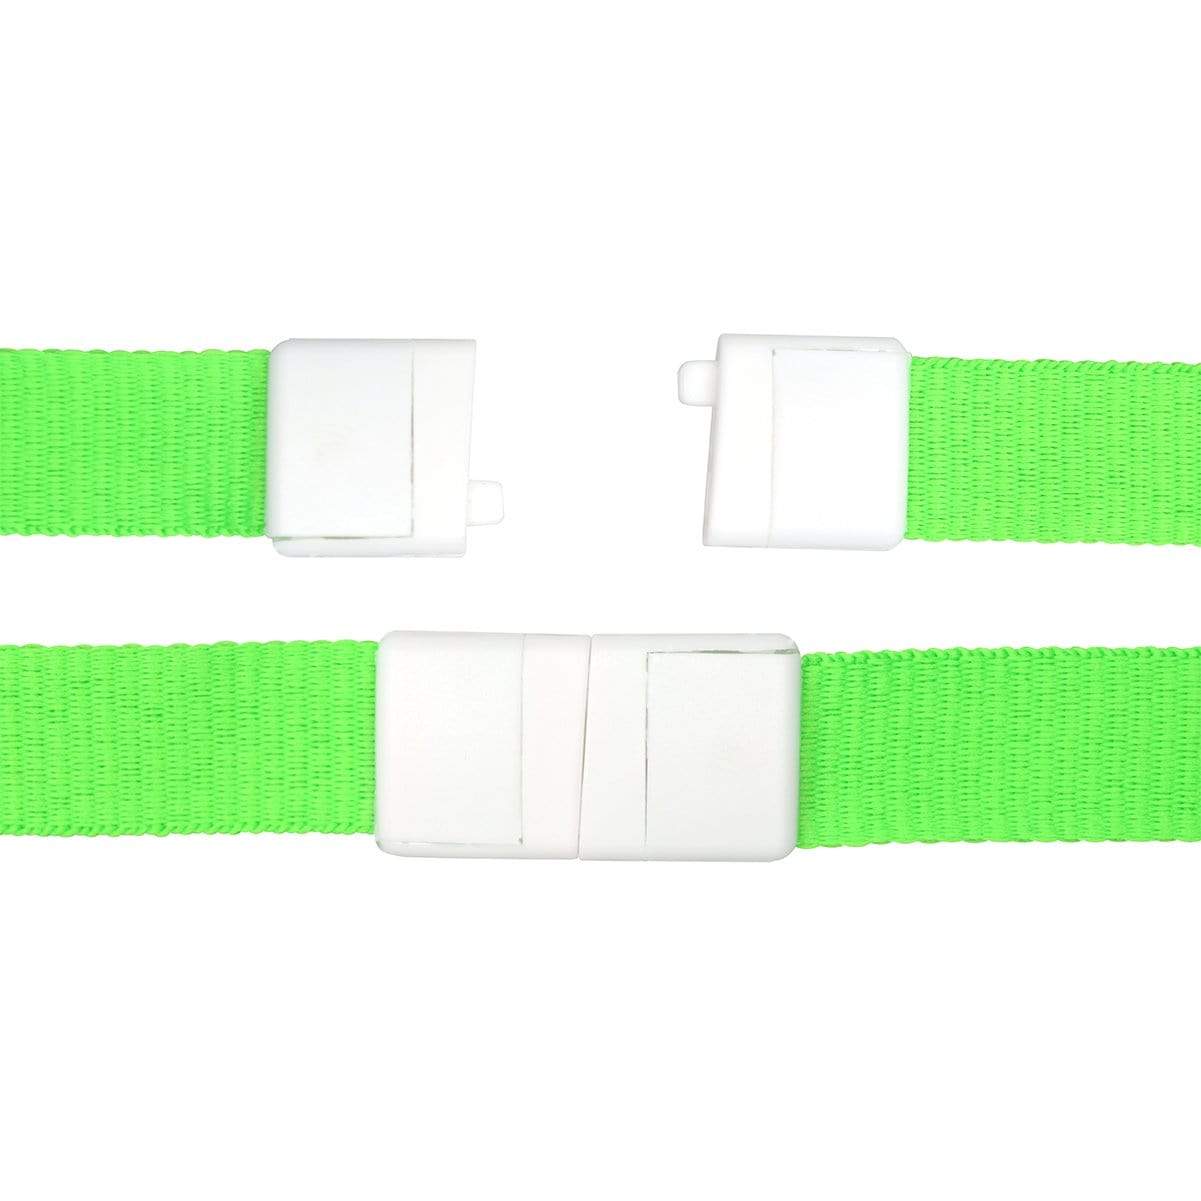 Neon Green Lanyard with Safety Breakaway Clasp - Bright Lime Green Lanyards 2138-5044